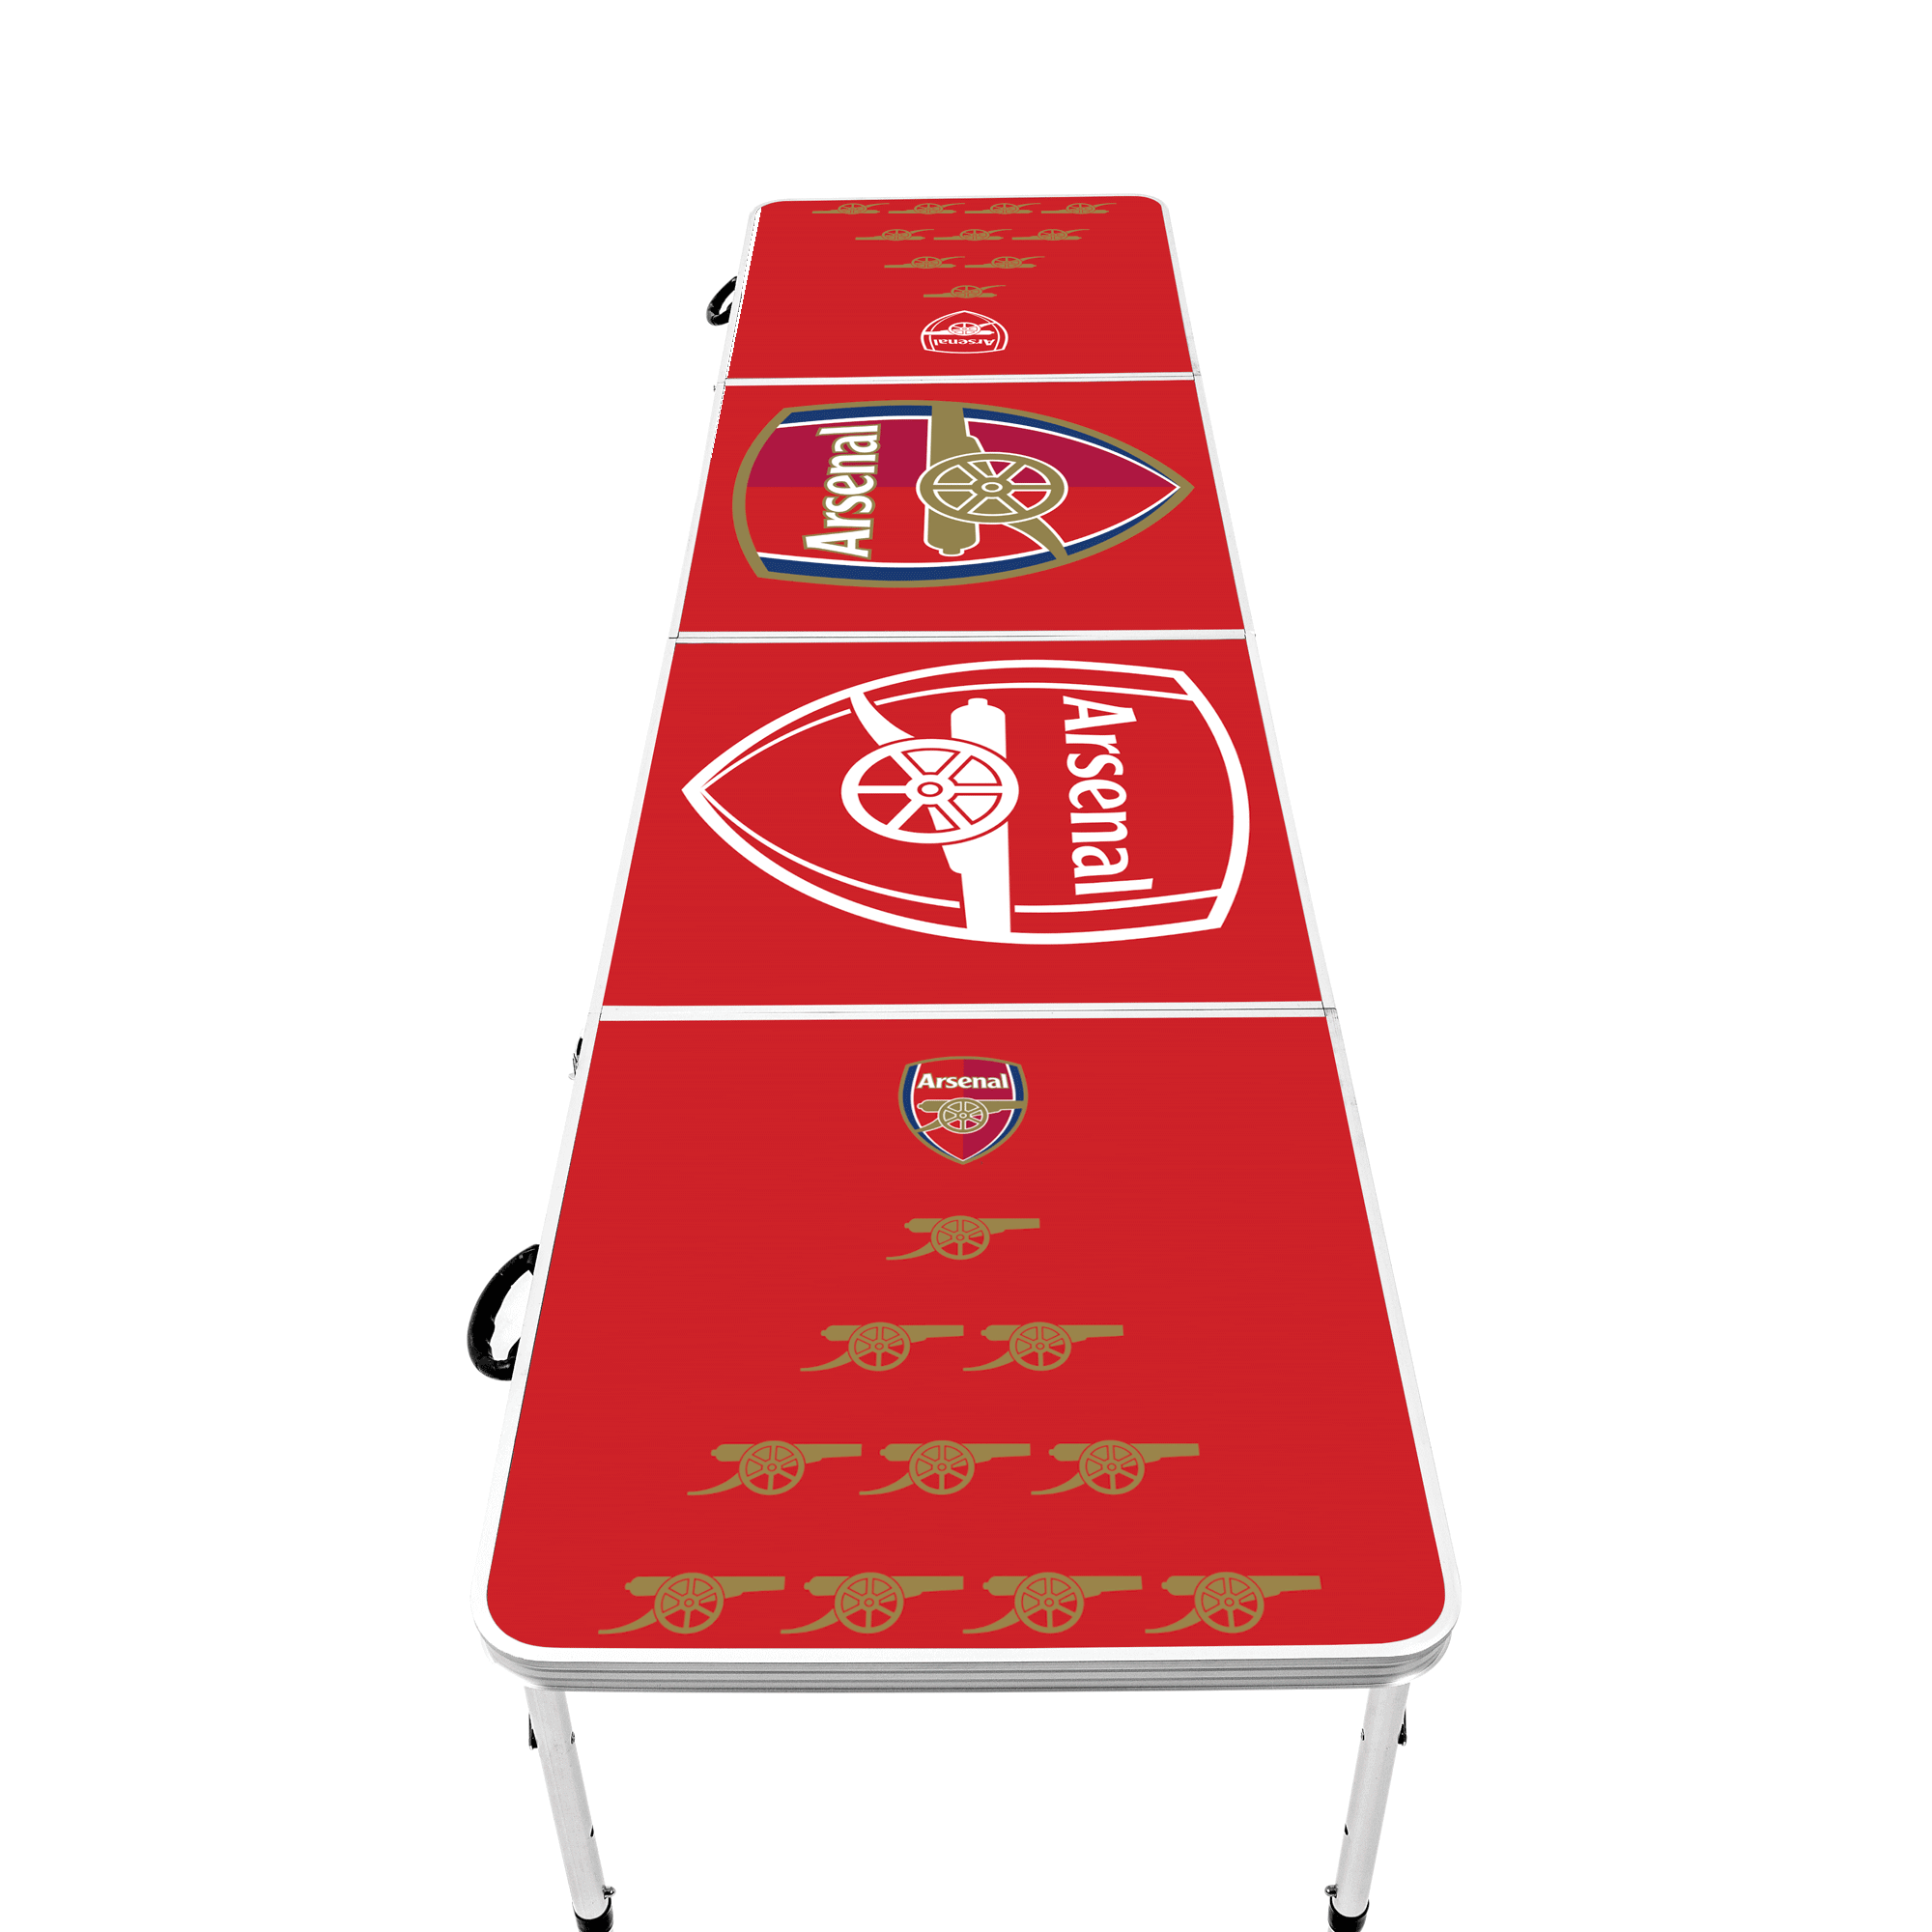 EPL BEER PONG TABLE_ARSENAL_STUBBY CLUB